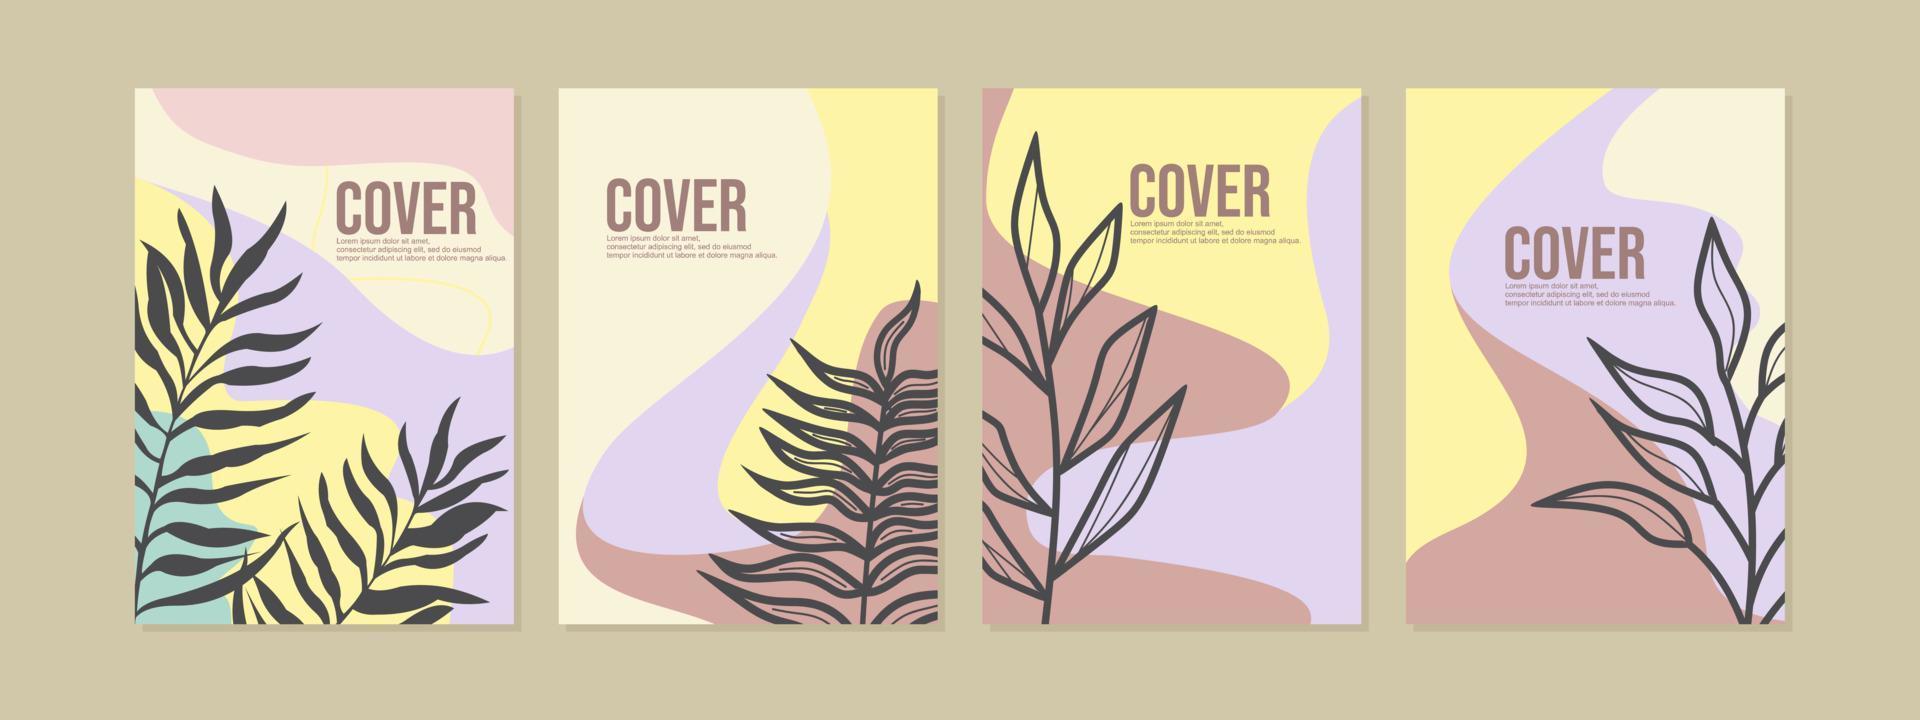 botanical style modern book cover design set. abstract background with silhouette leaves.A4 cover for notebook,journal,catalog,invitation. vector